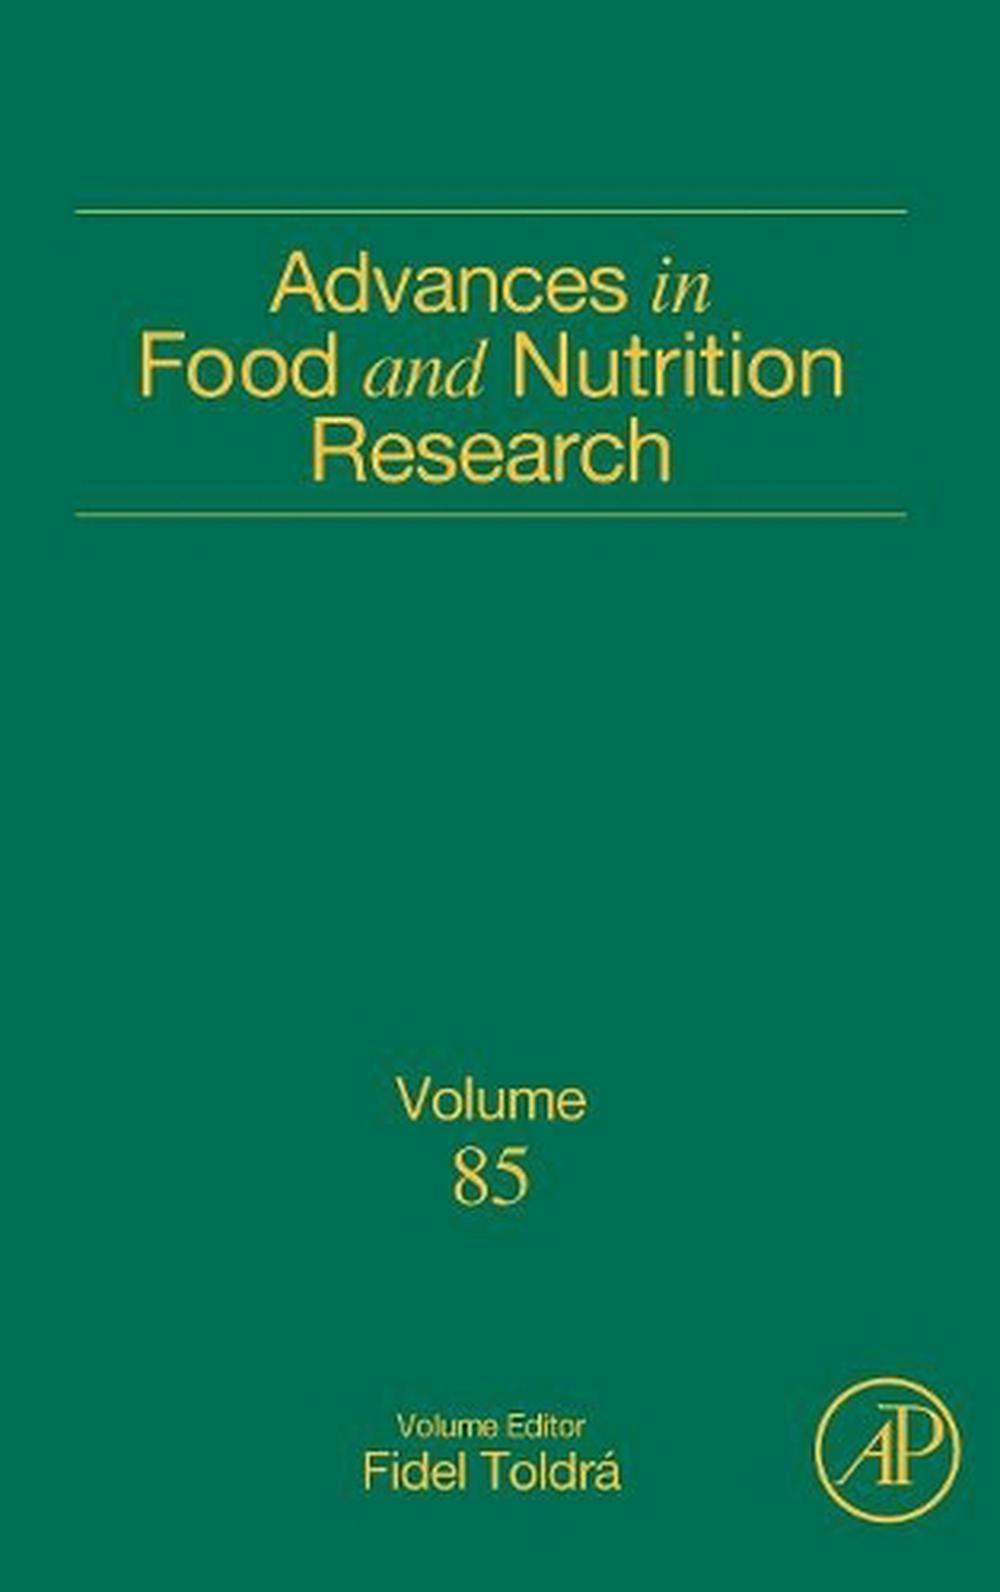 research books on nutrition